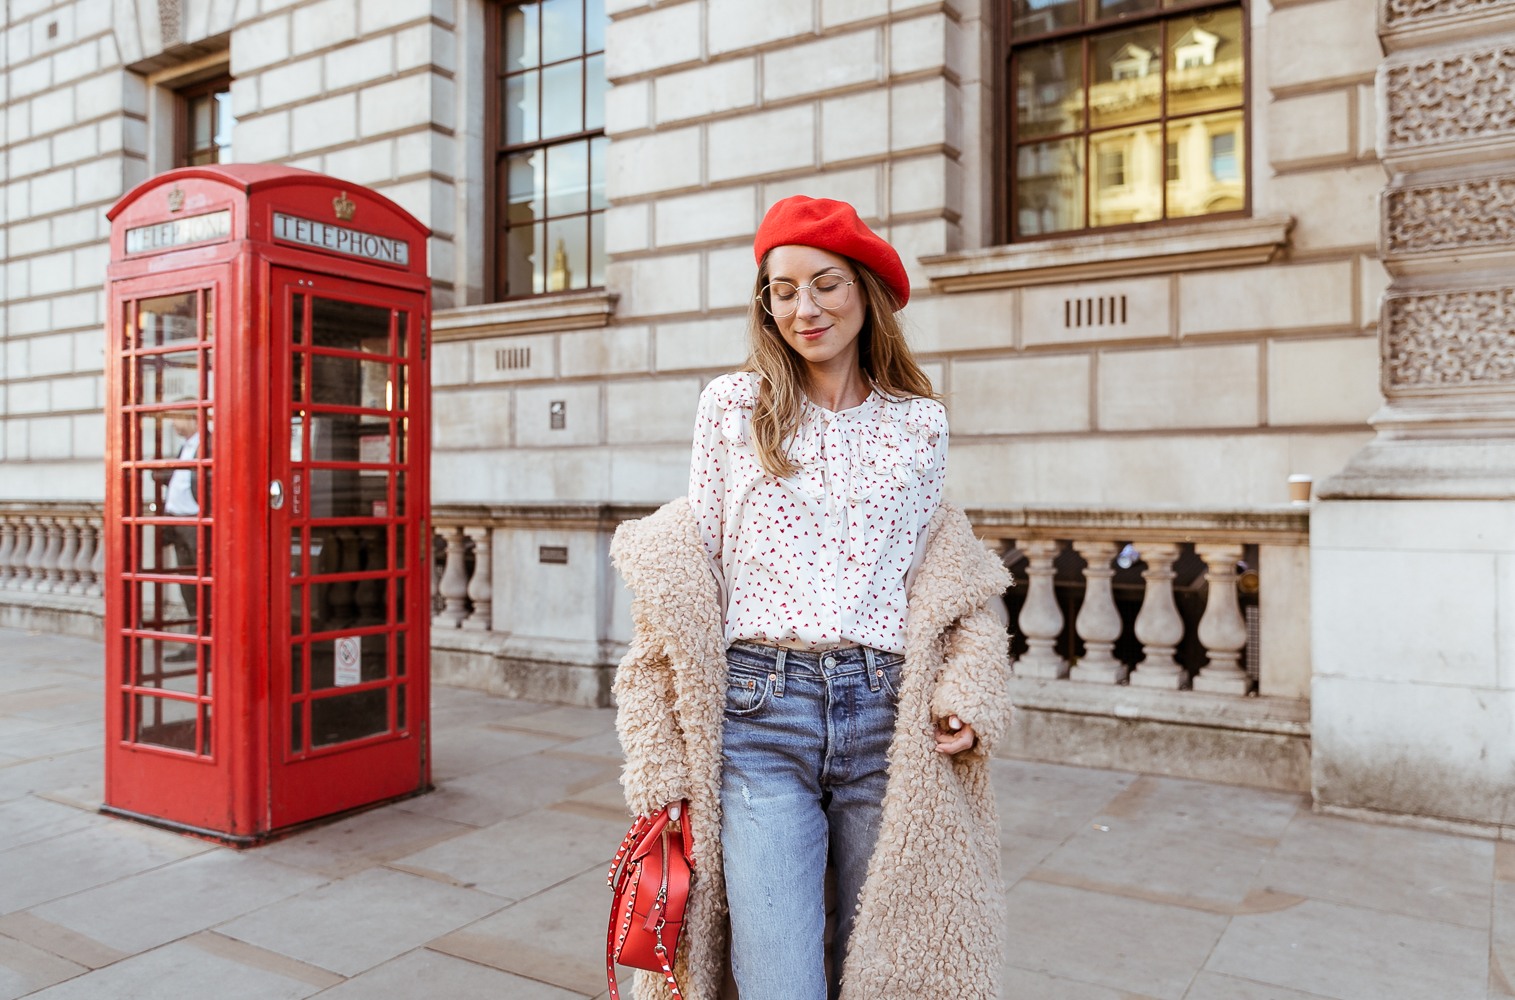 teddy coat levis 501 jeans red hat steffen schraut blouse hearts red valentino bag outfit street style london white boots veja du street fashion